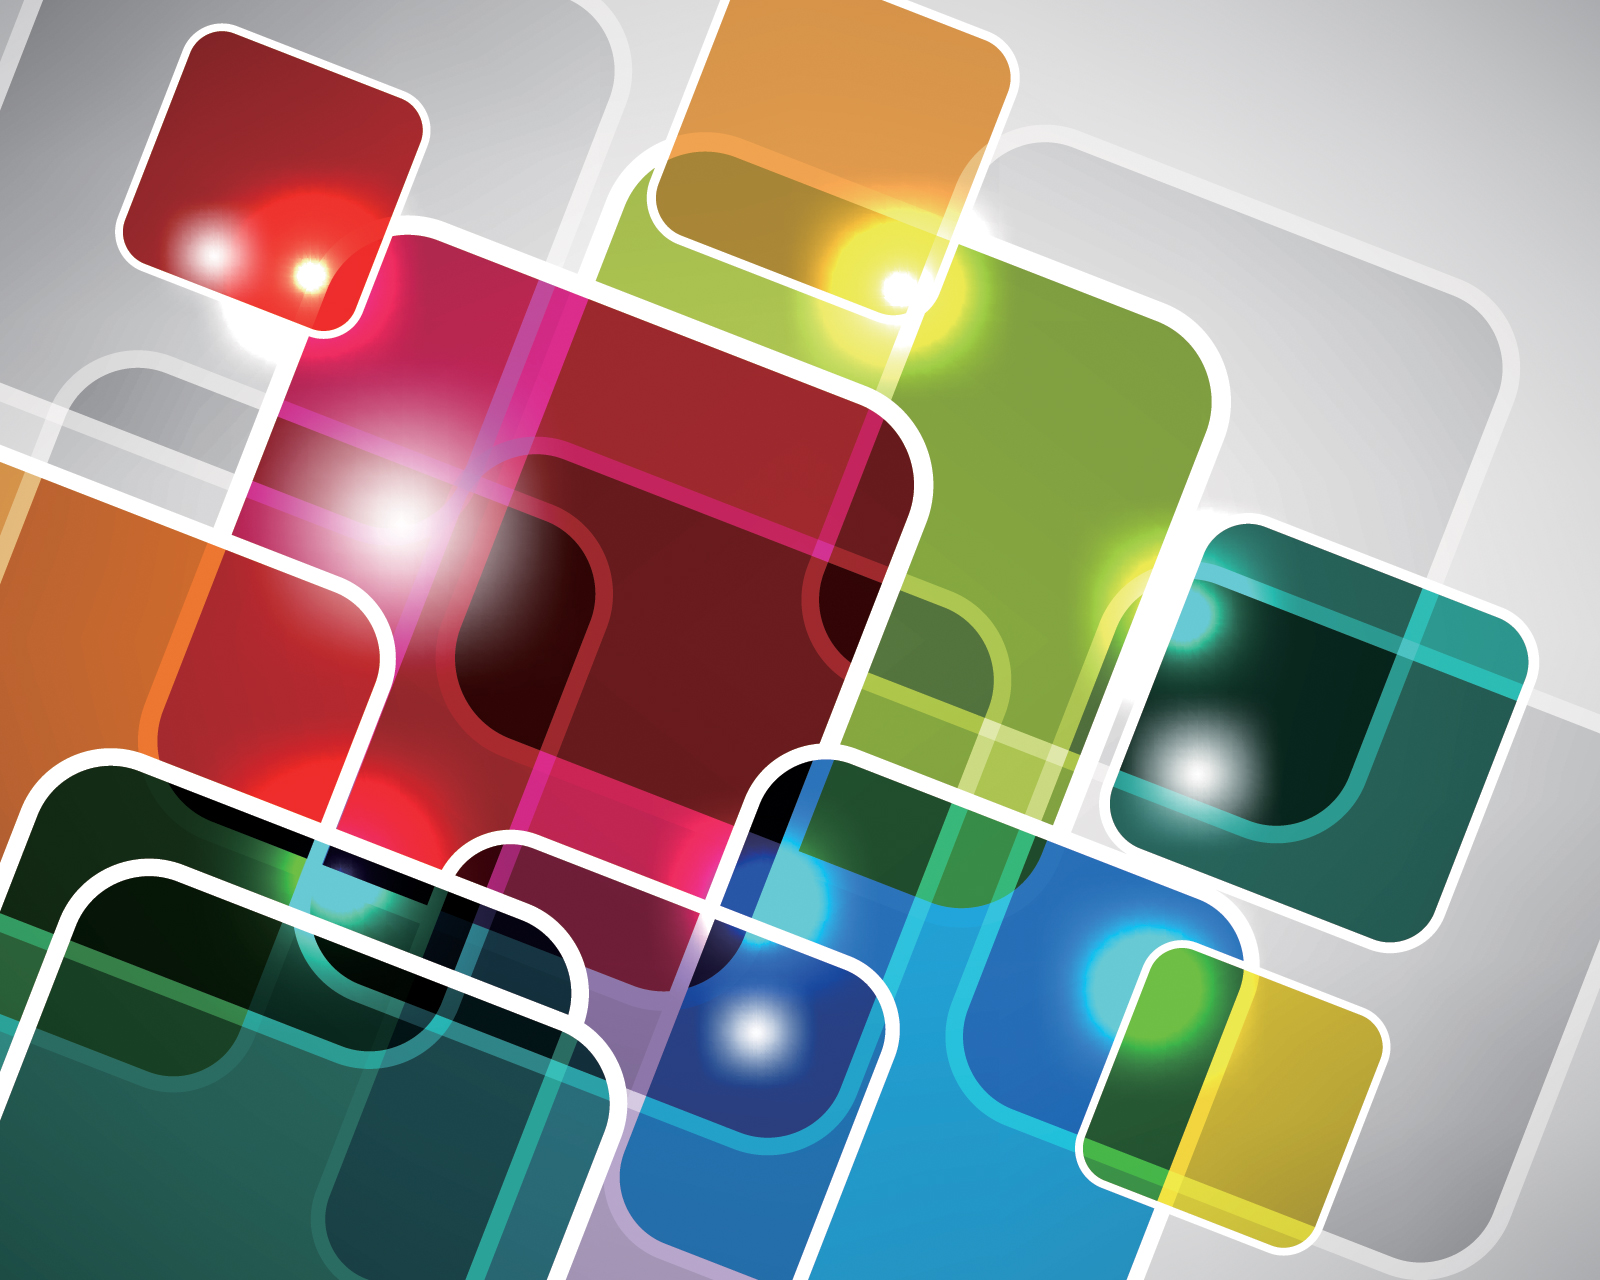 Abstract Colorful Squares backgrounds